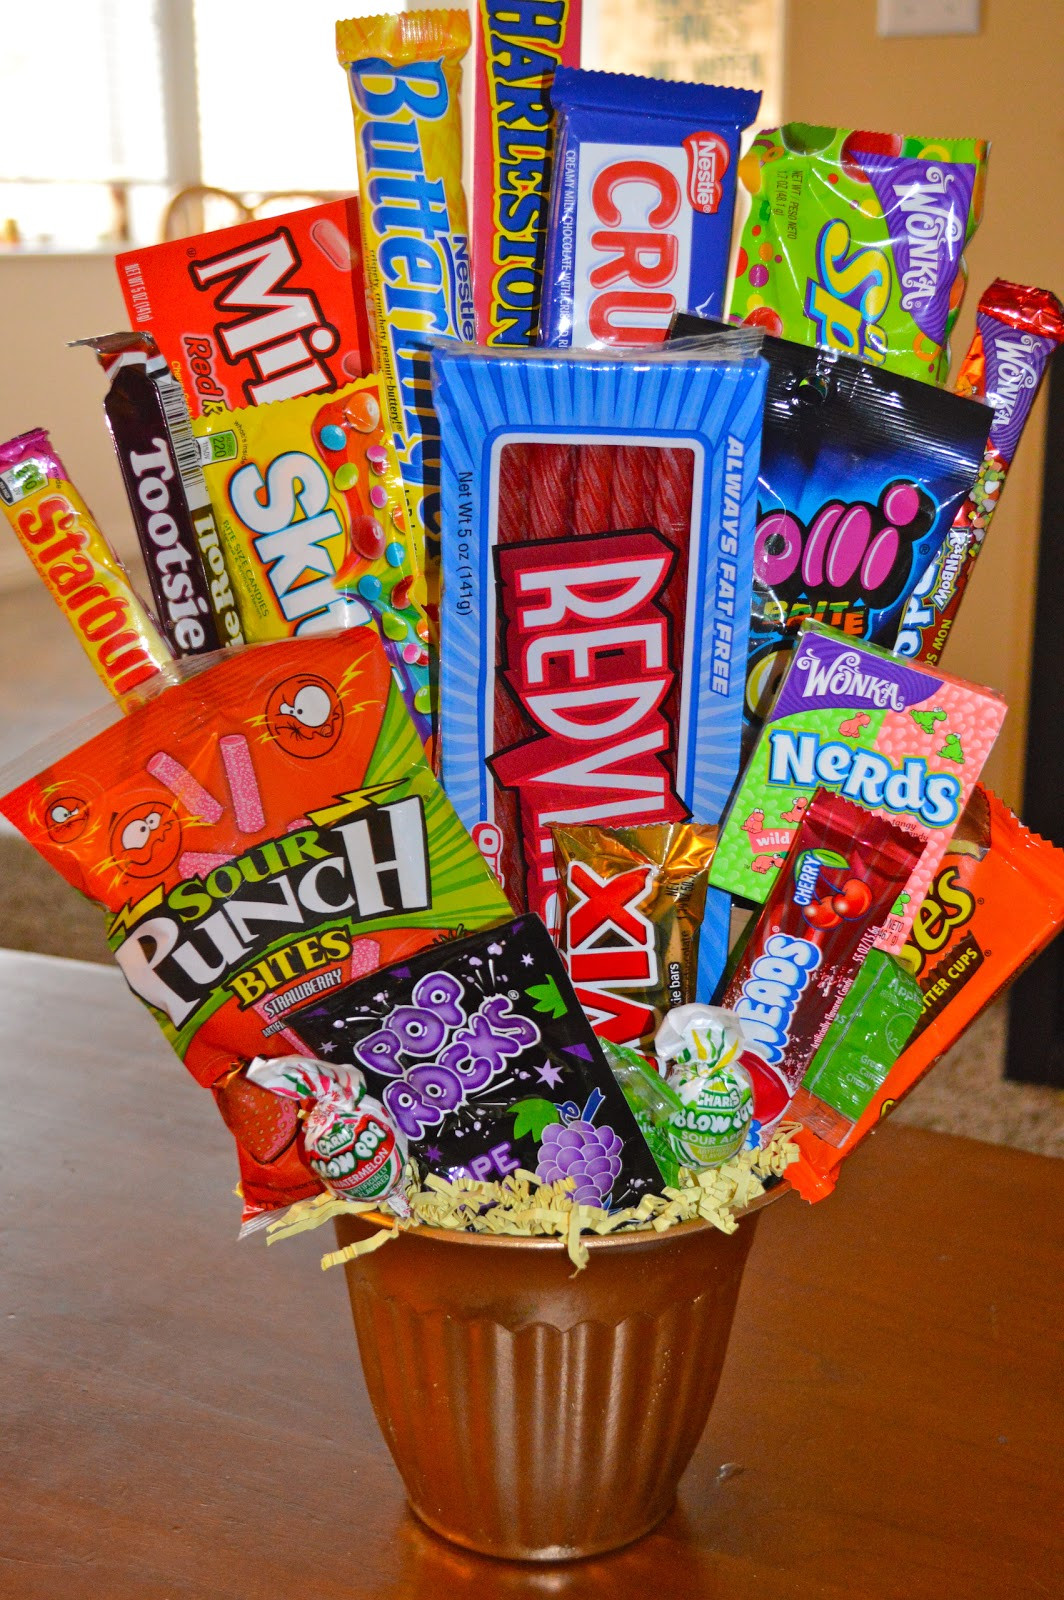 Candy Birthday Gift Ideas
 A Dose of Serendipity CANDY GIFT BUCKET